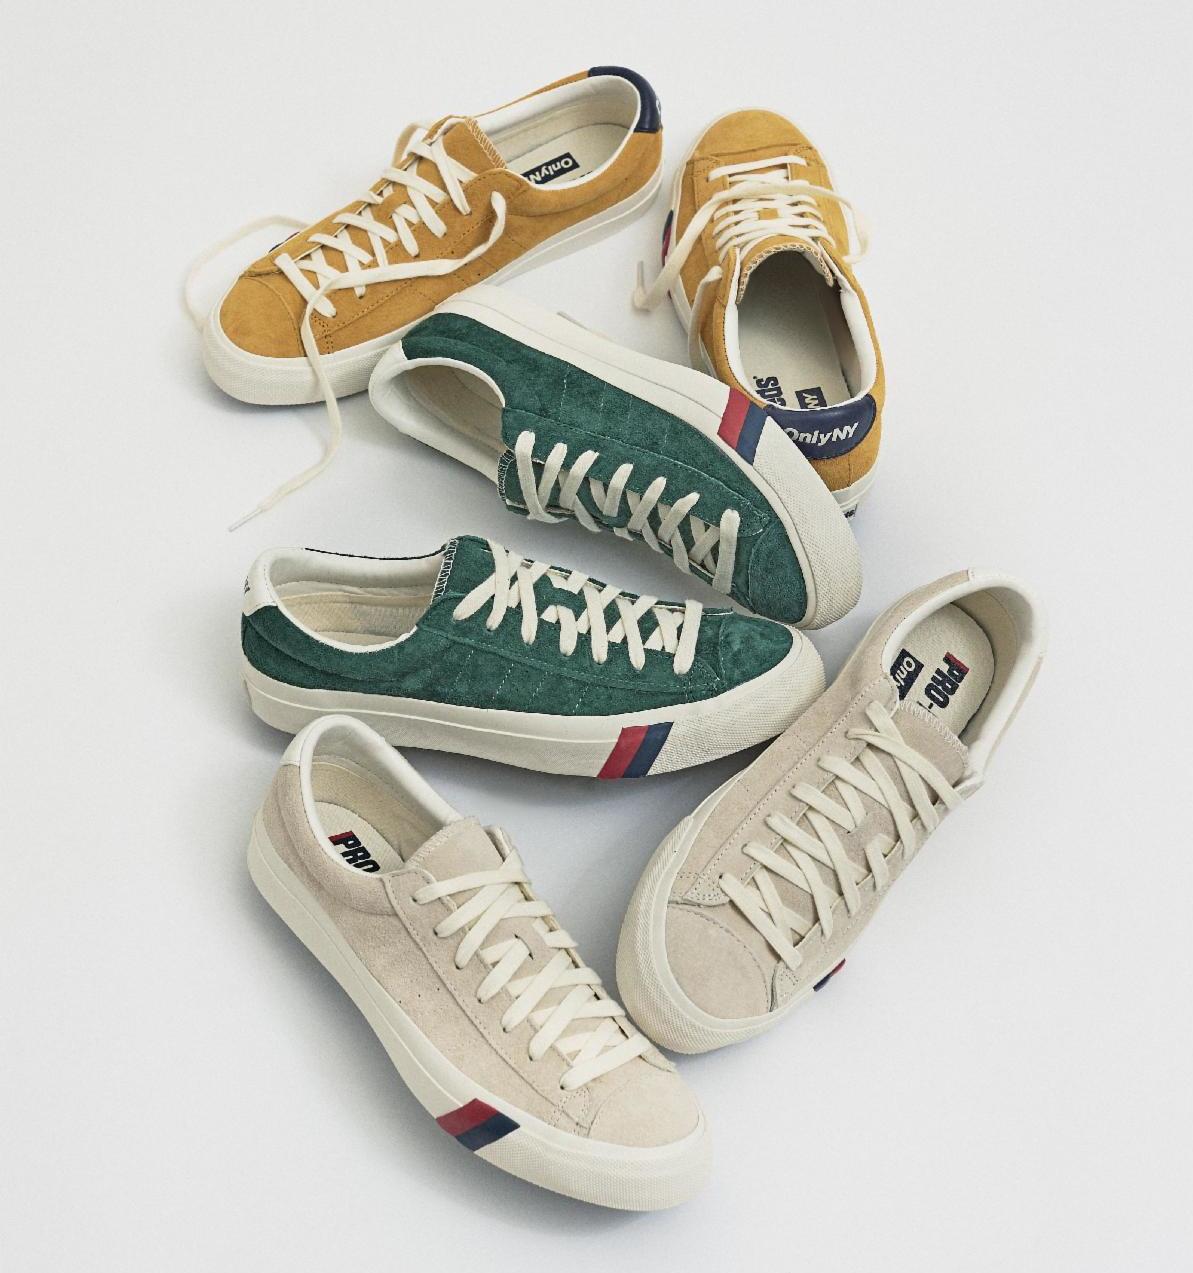 Only NY x Pro Keds Royal Lo Plus Collection